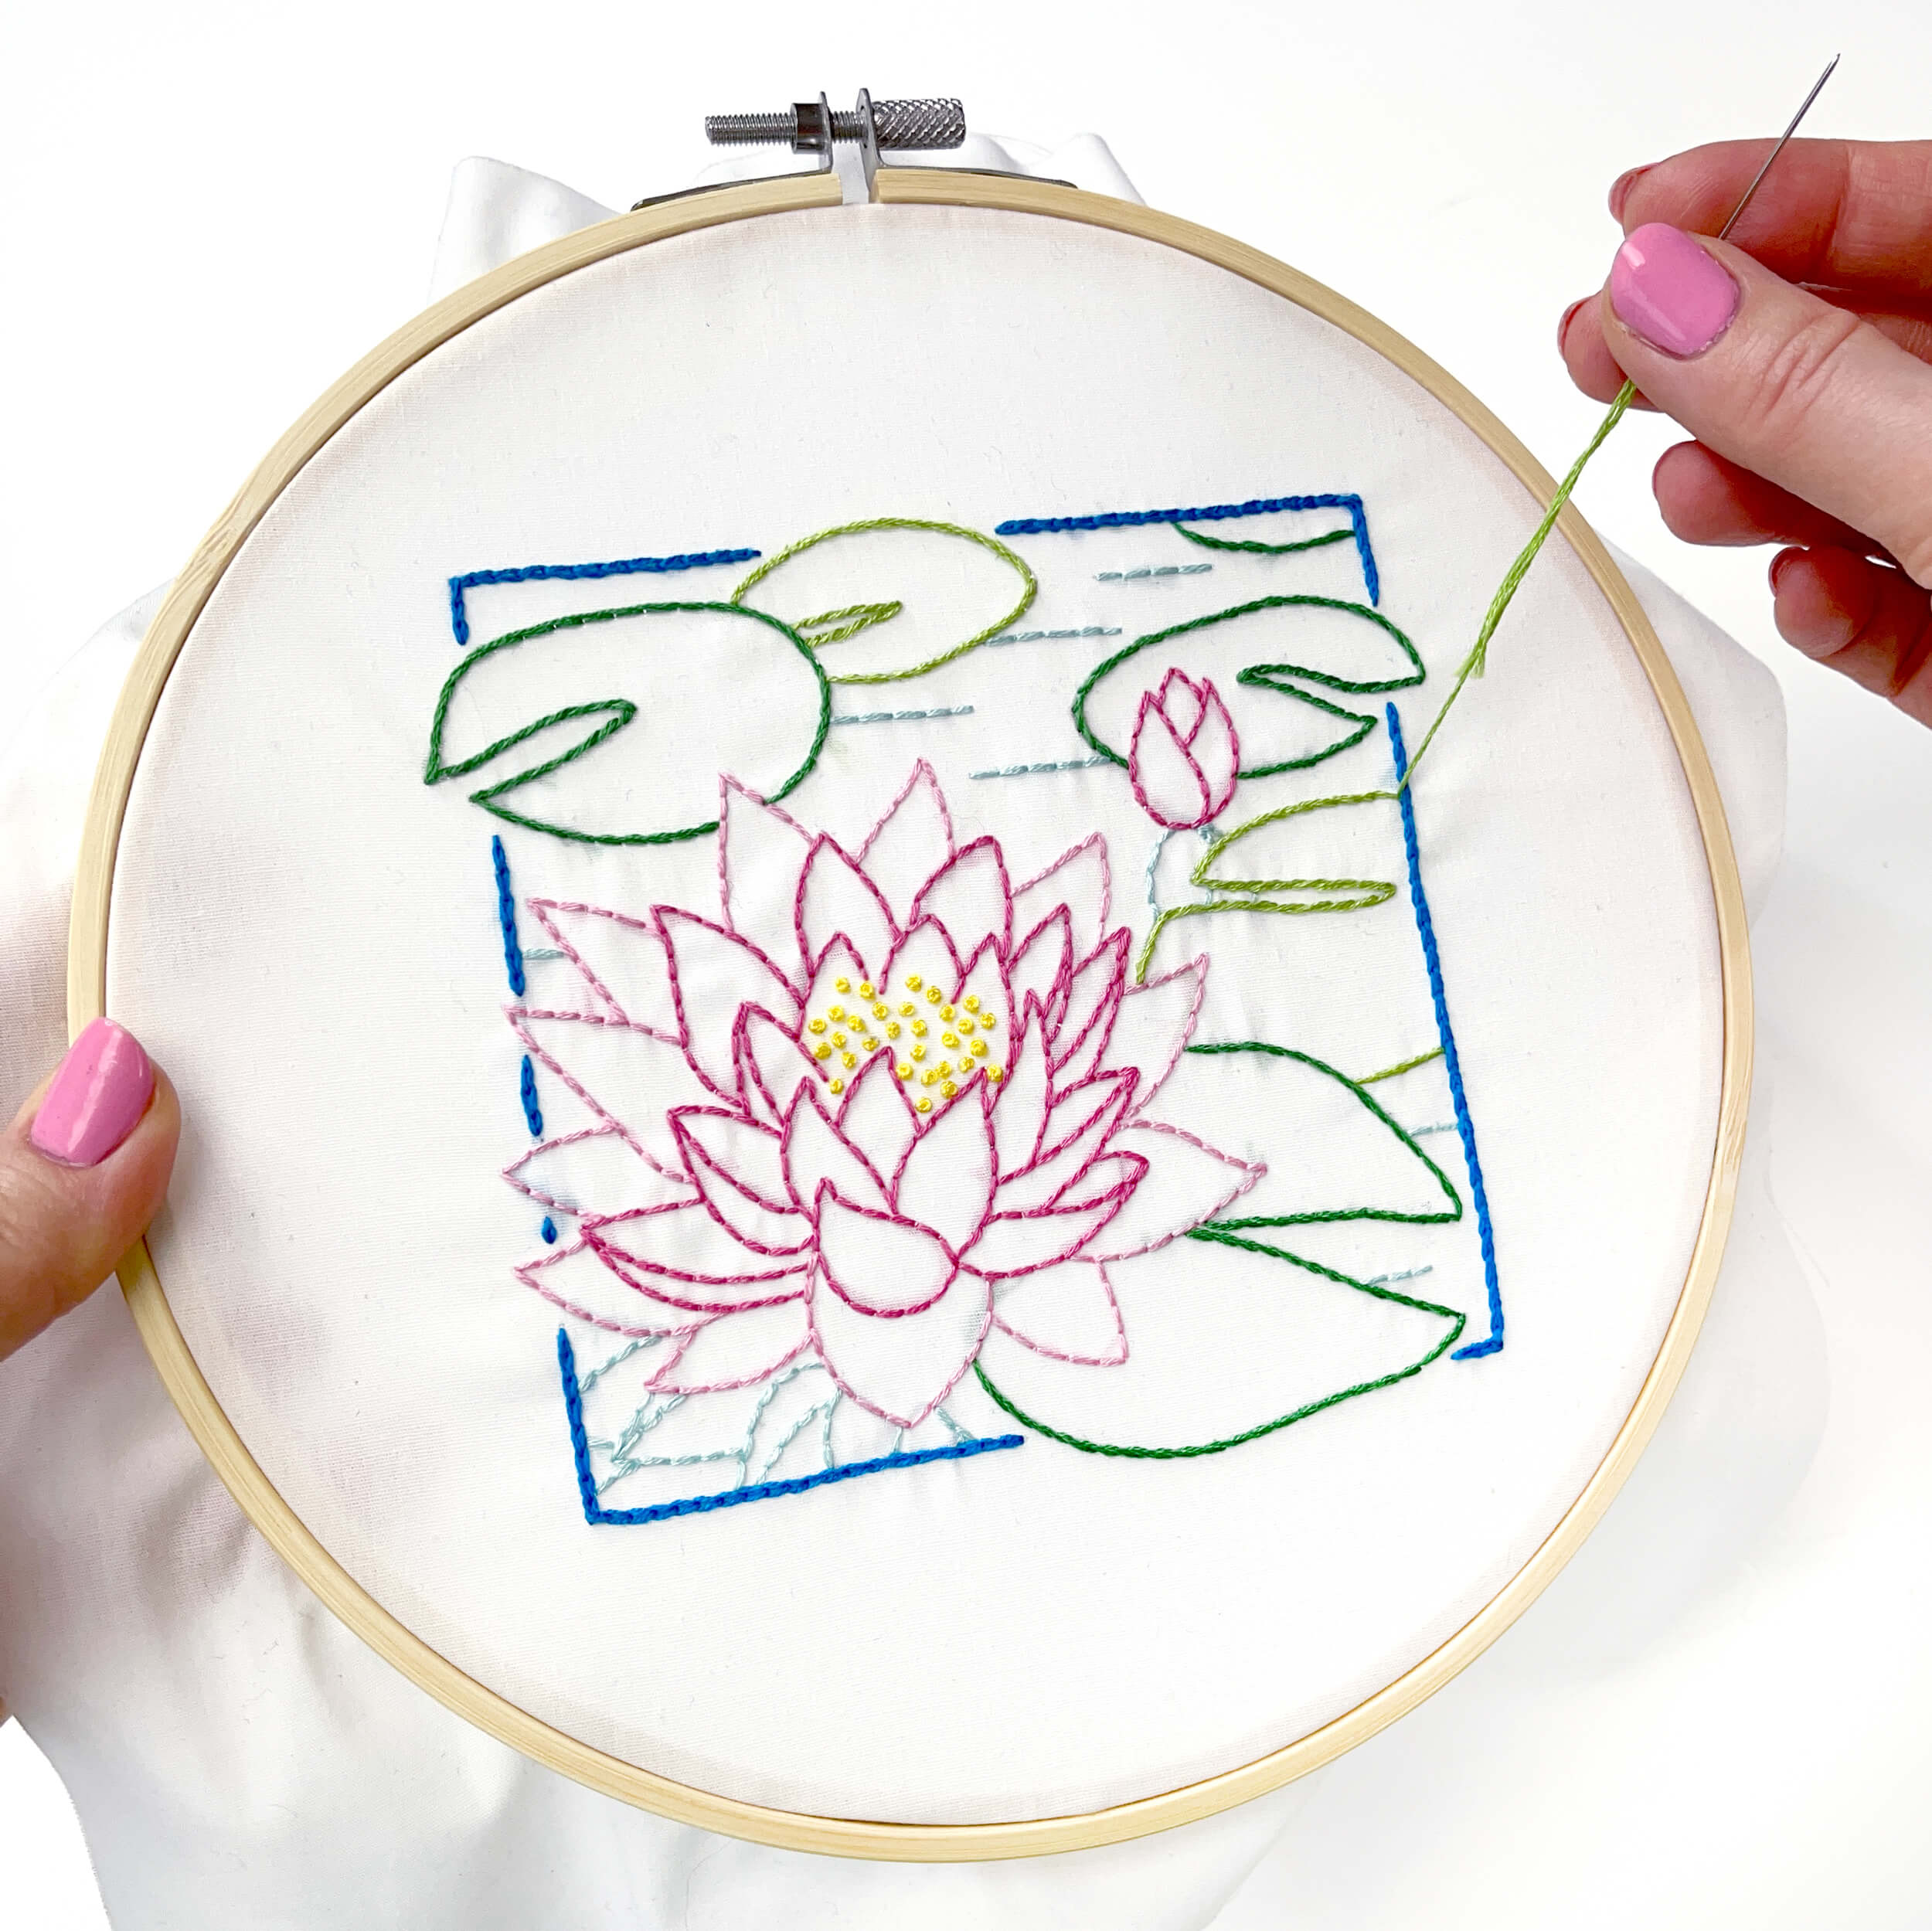 Hand stitching the July Water lily with blue embroidery floss